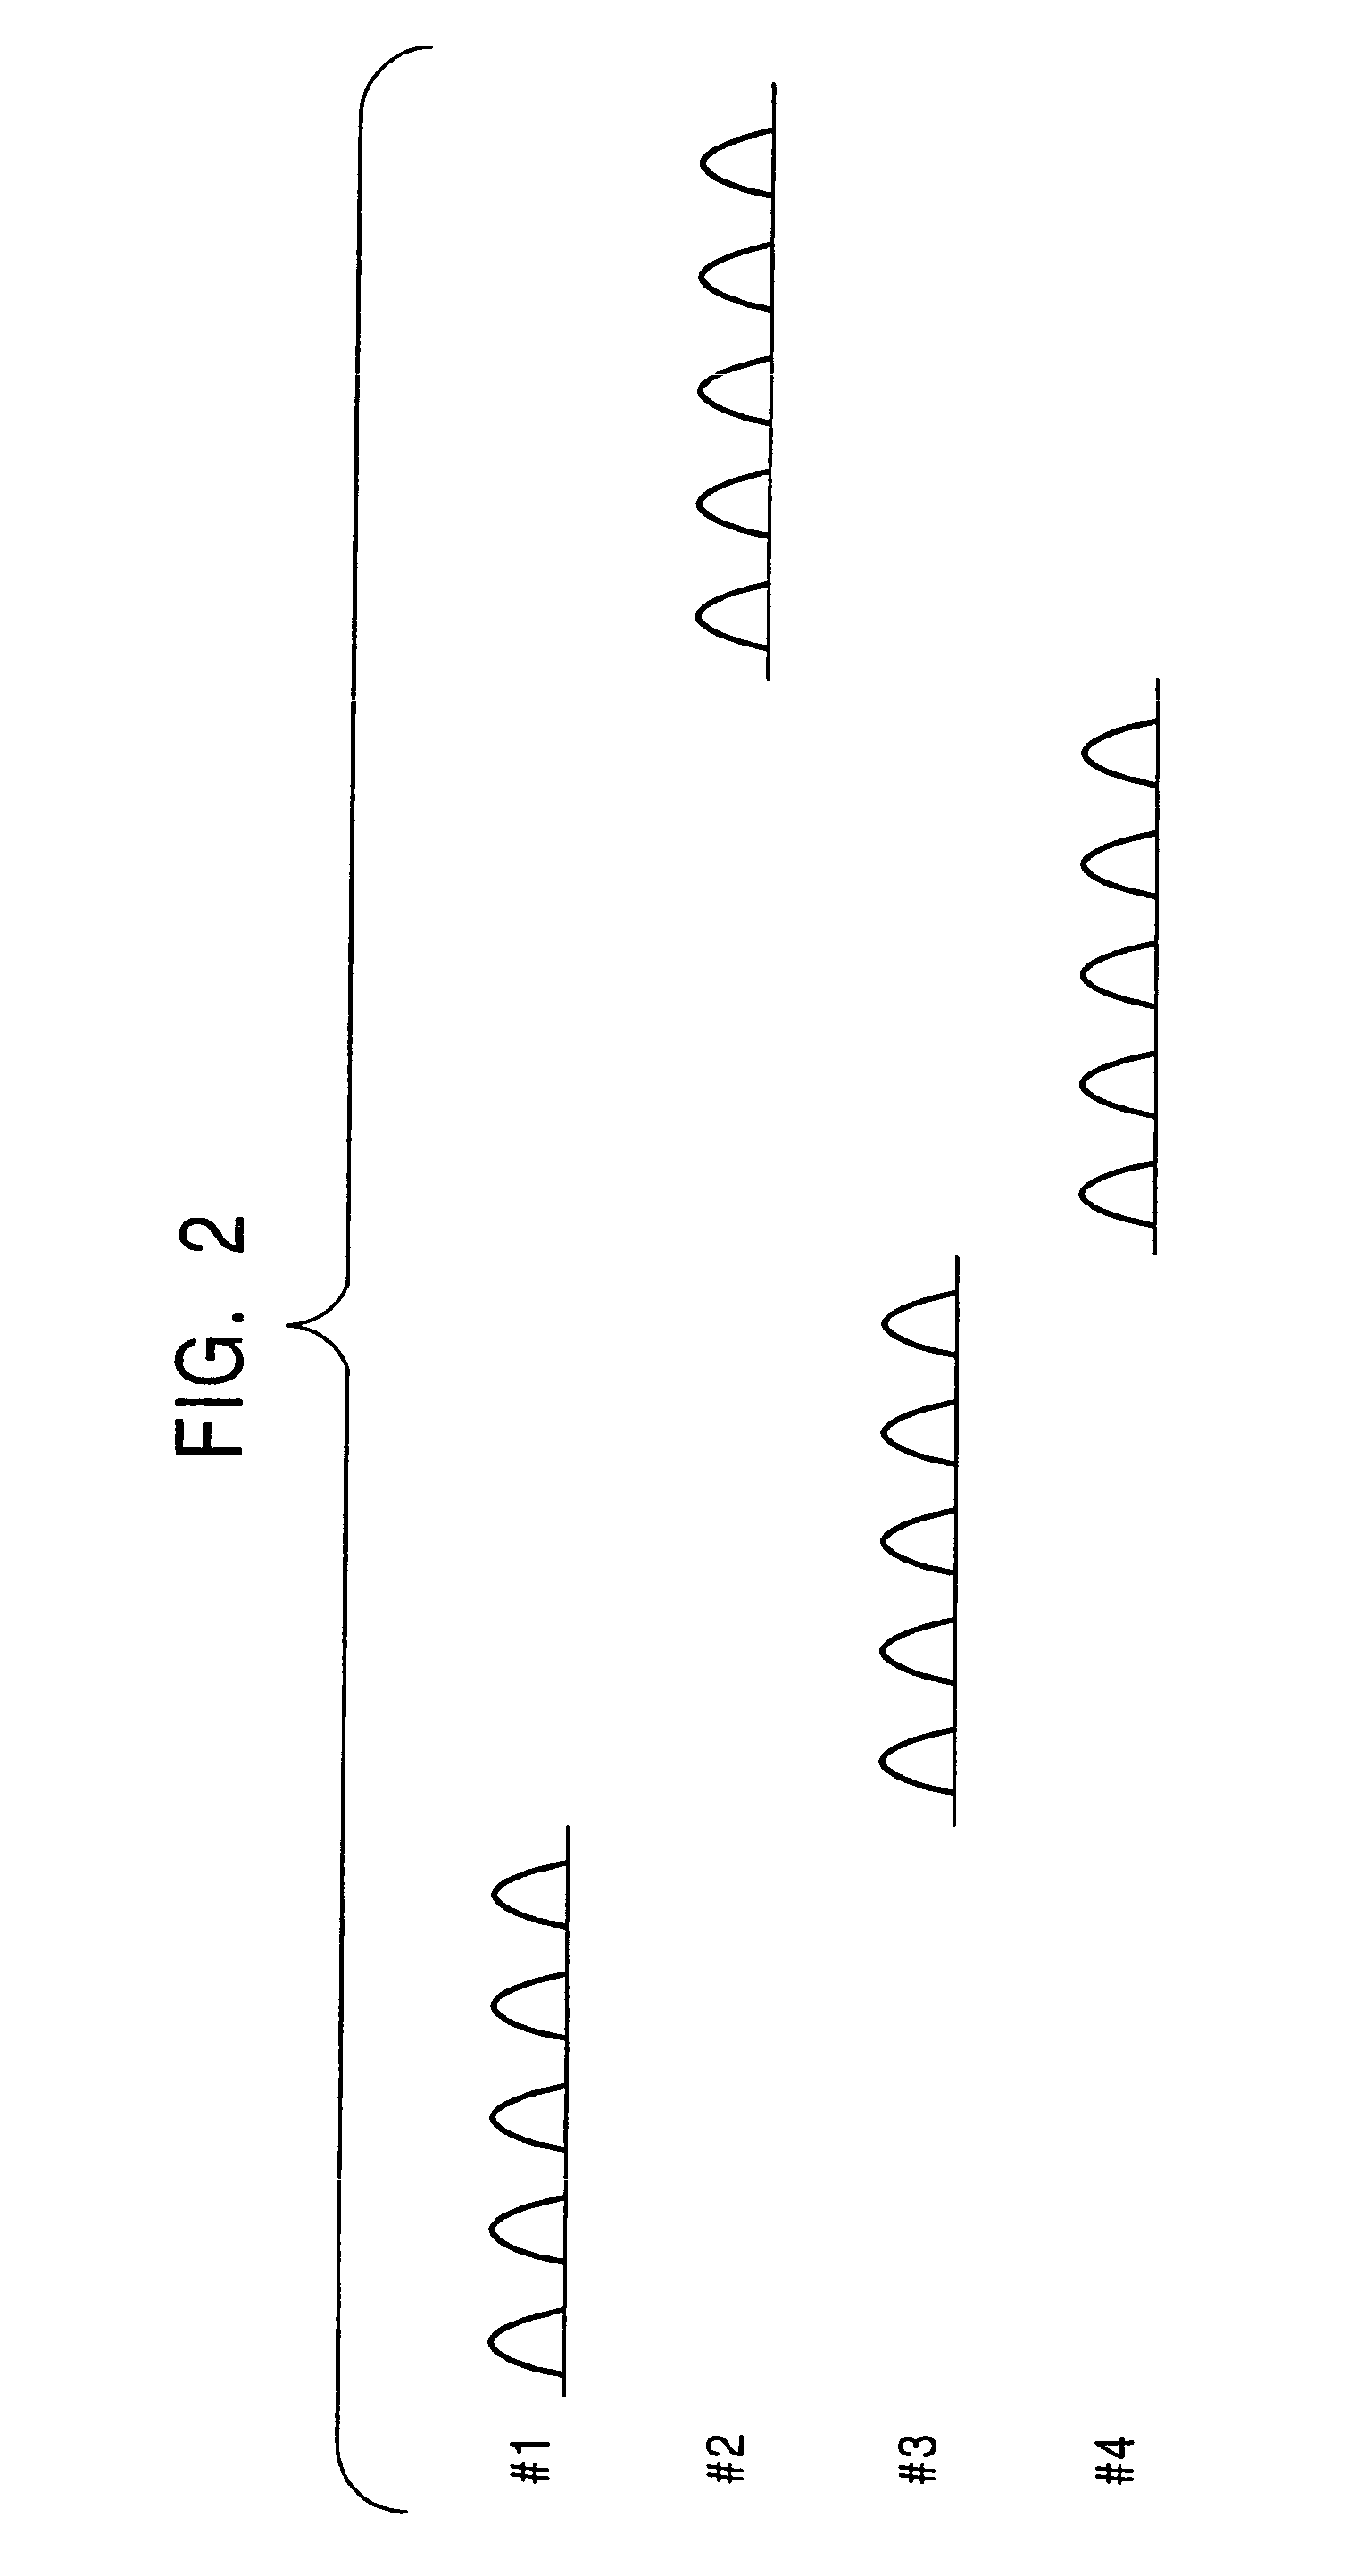 Diesel engine control system and control method